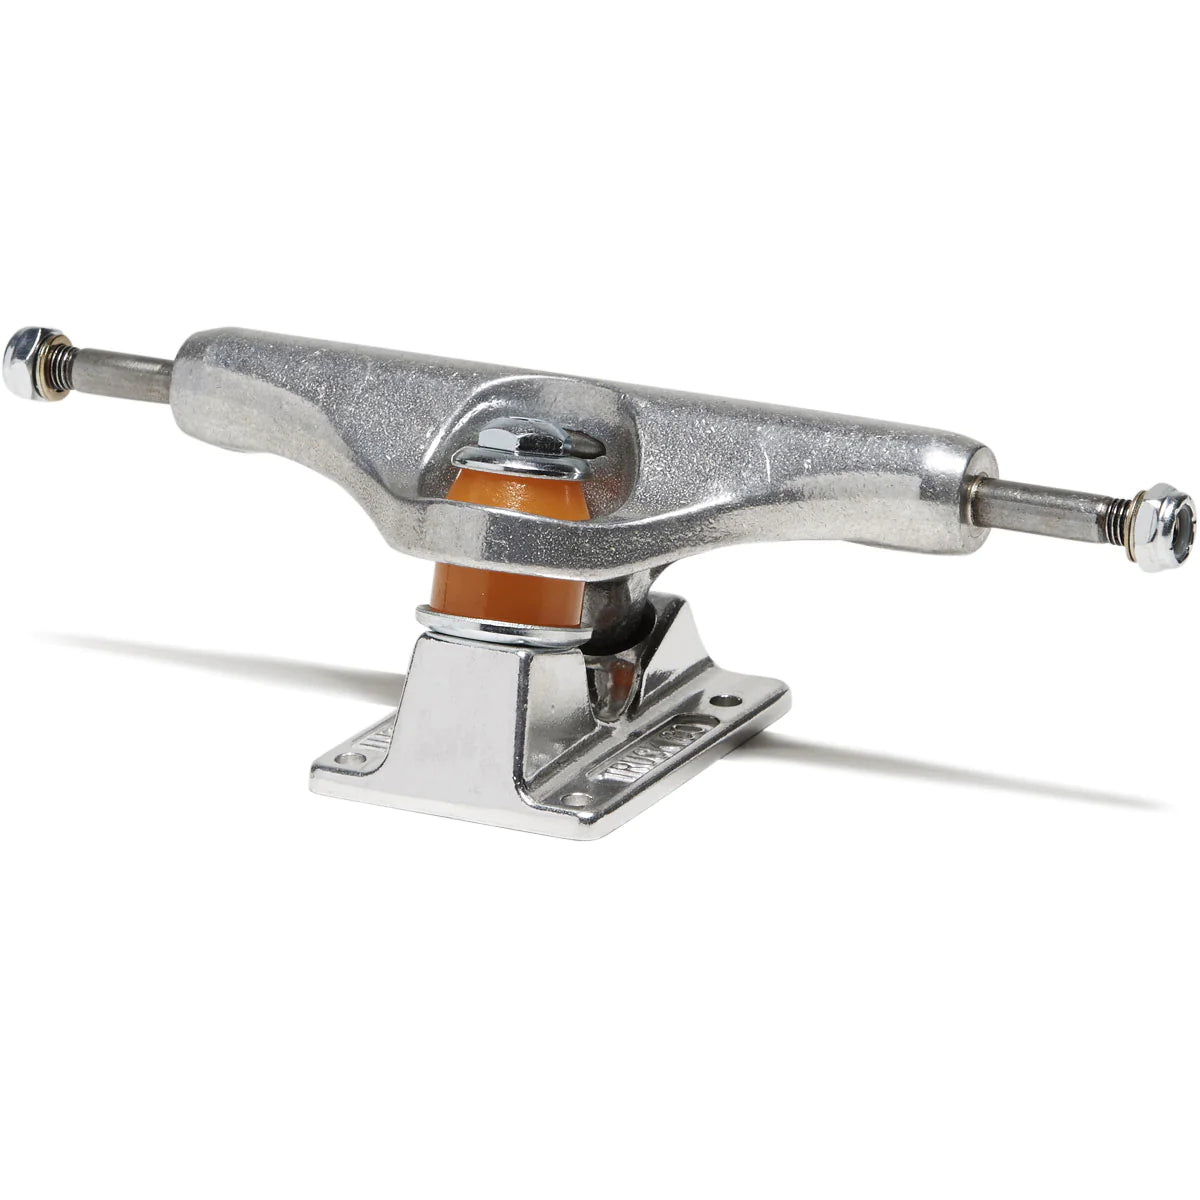 Independent Forged Hollow Mid Skateboard Trucks